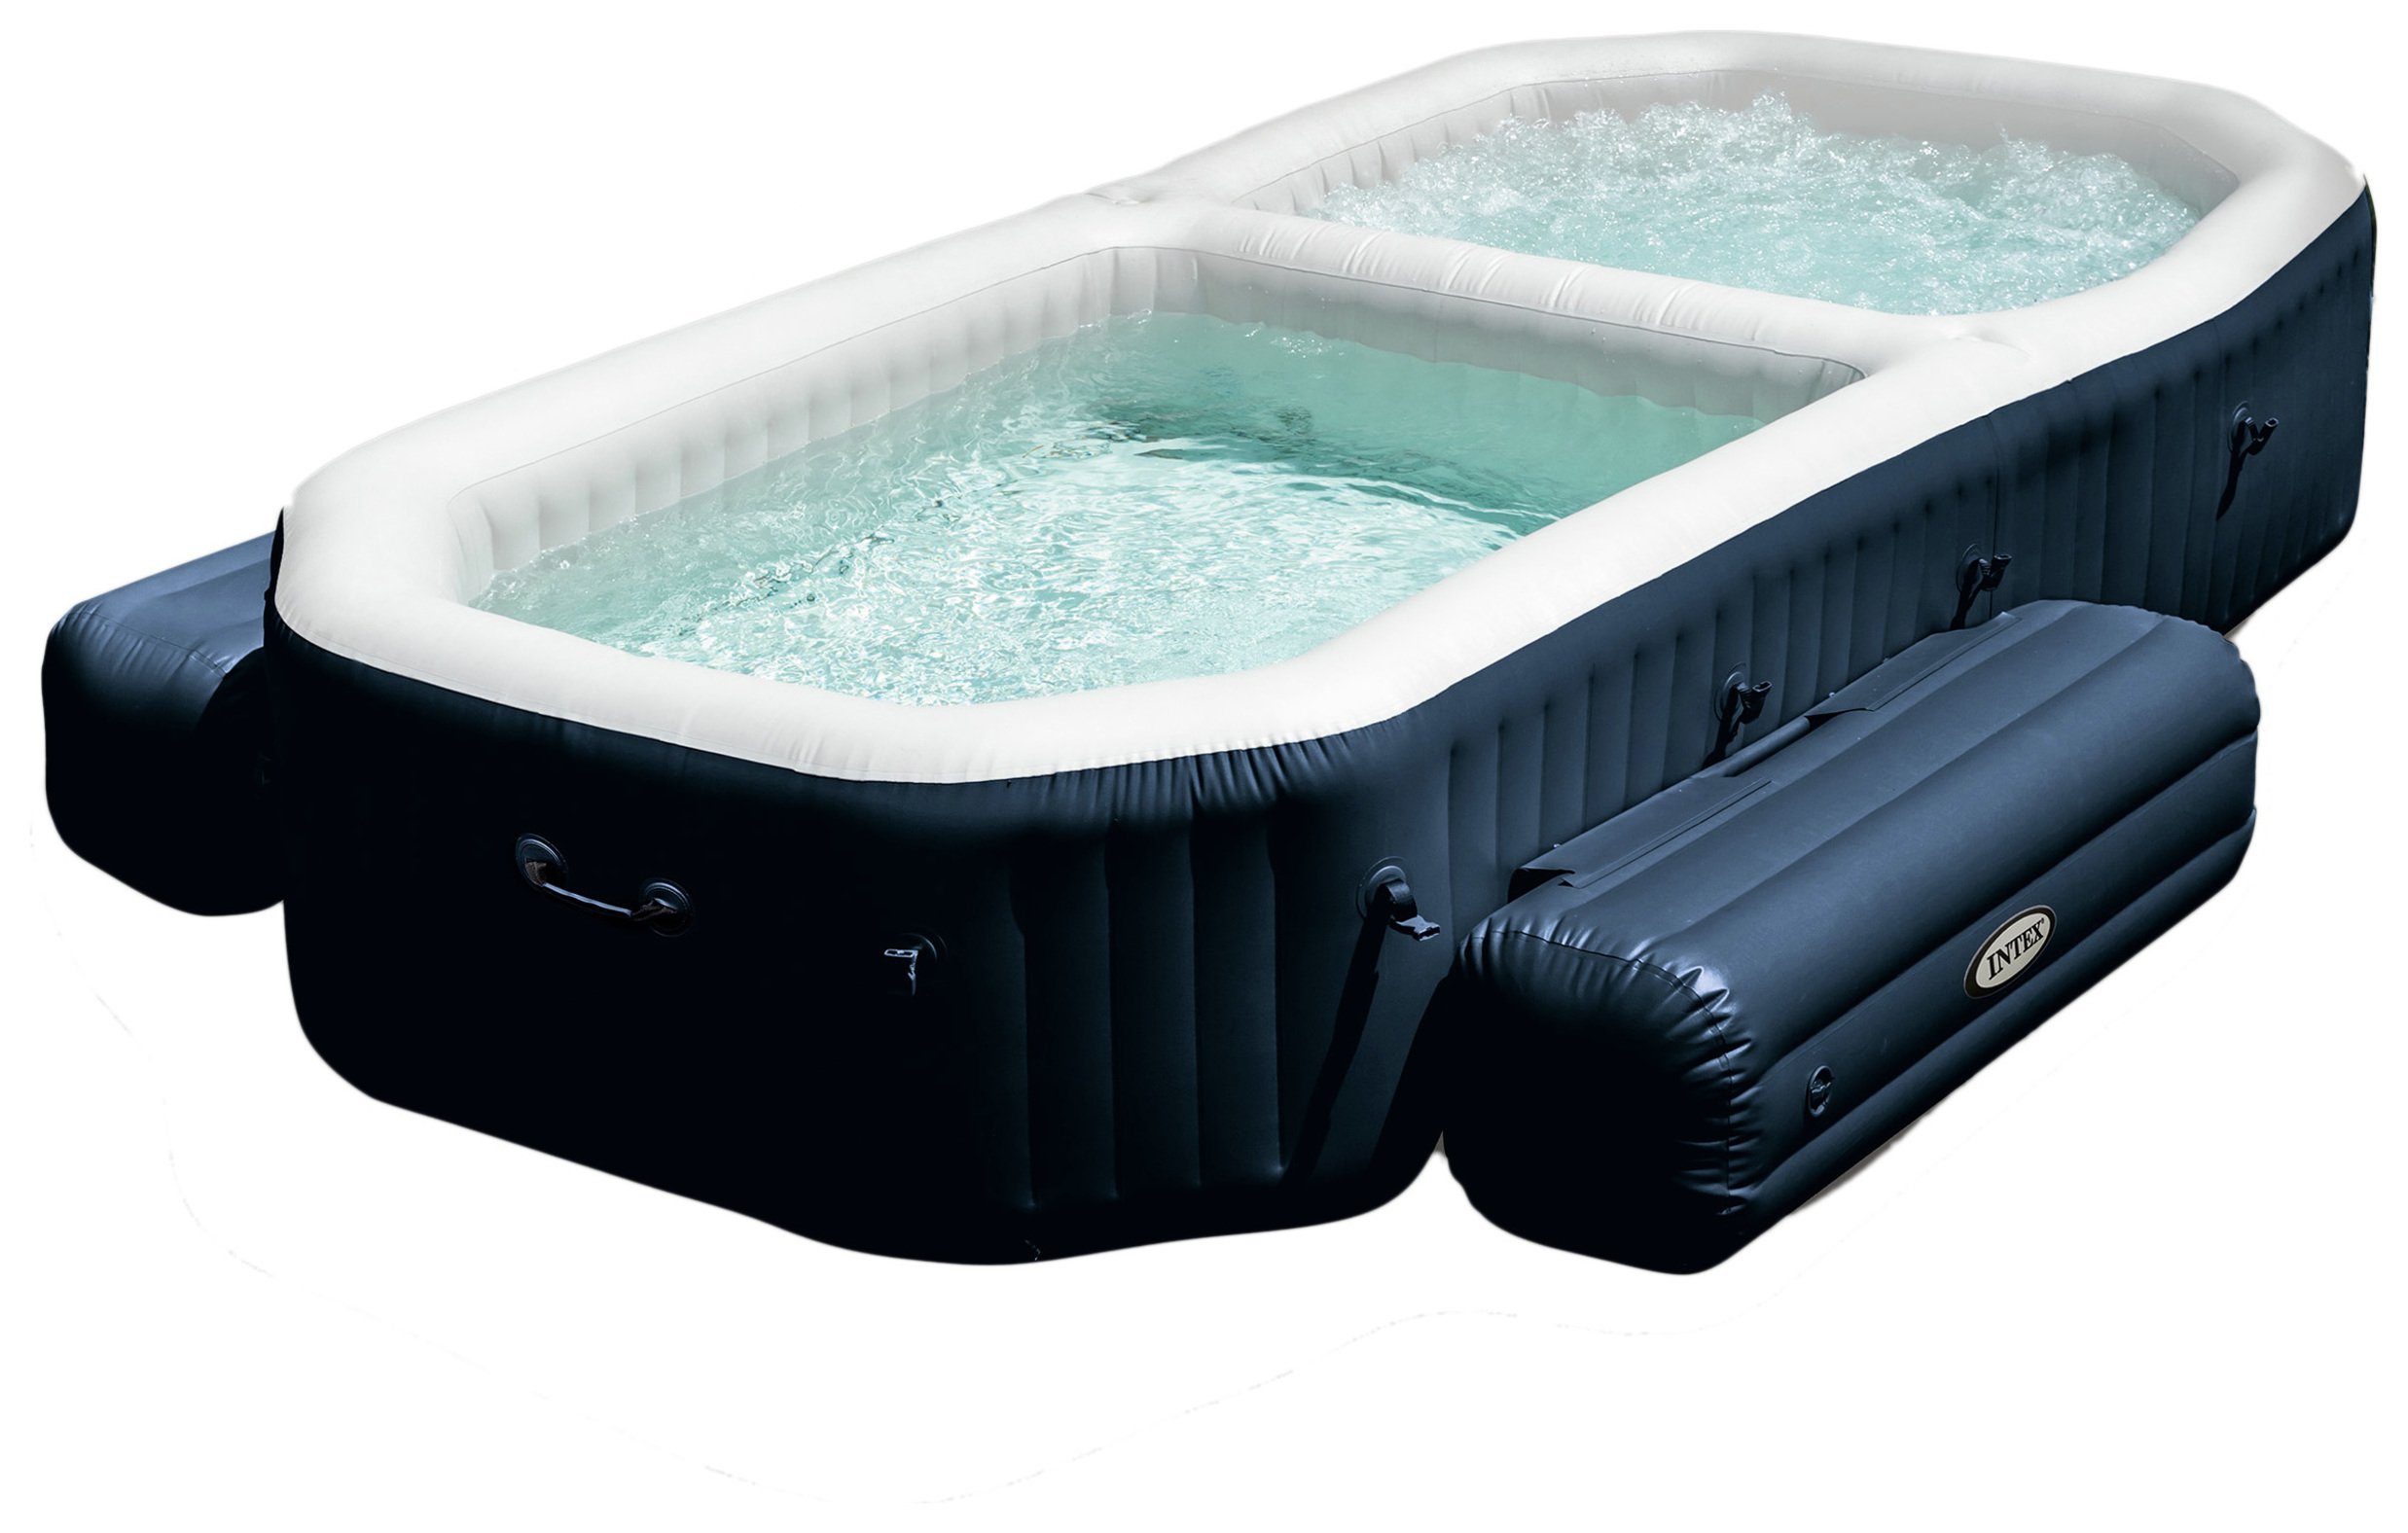 Intex Pure Spa with Plunge Pool Review